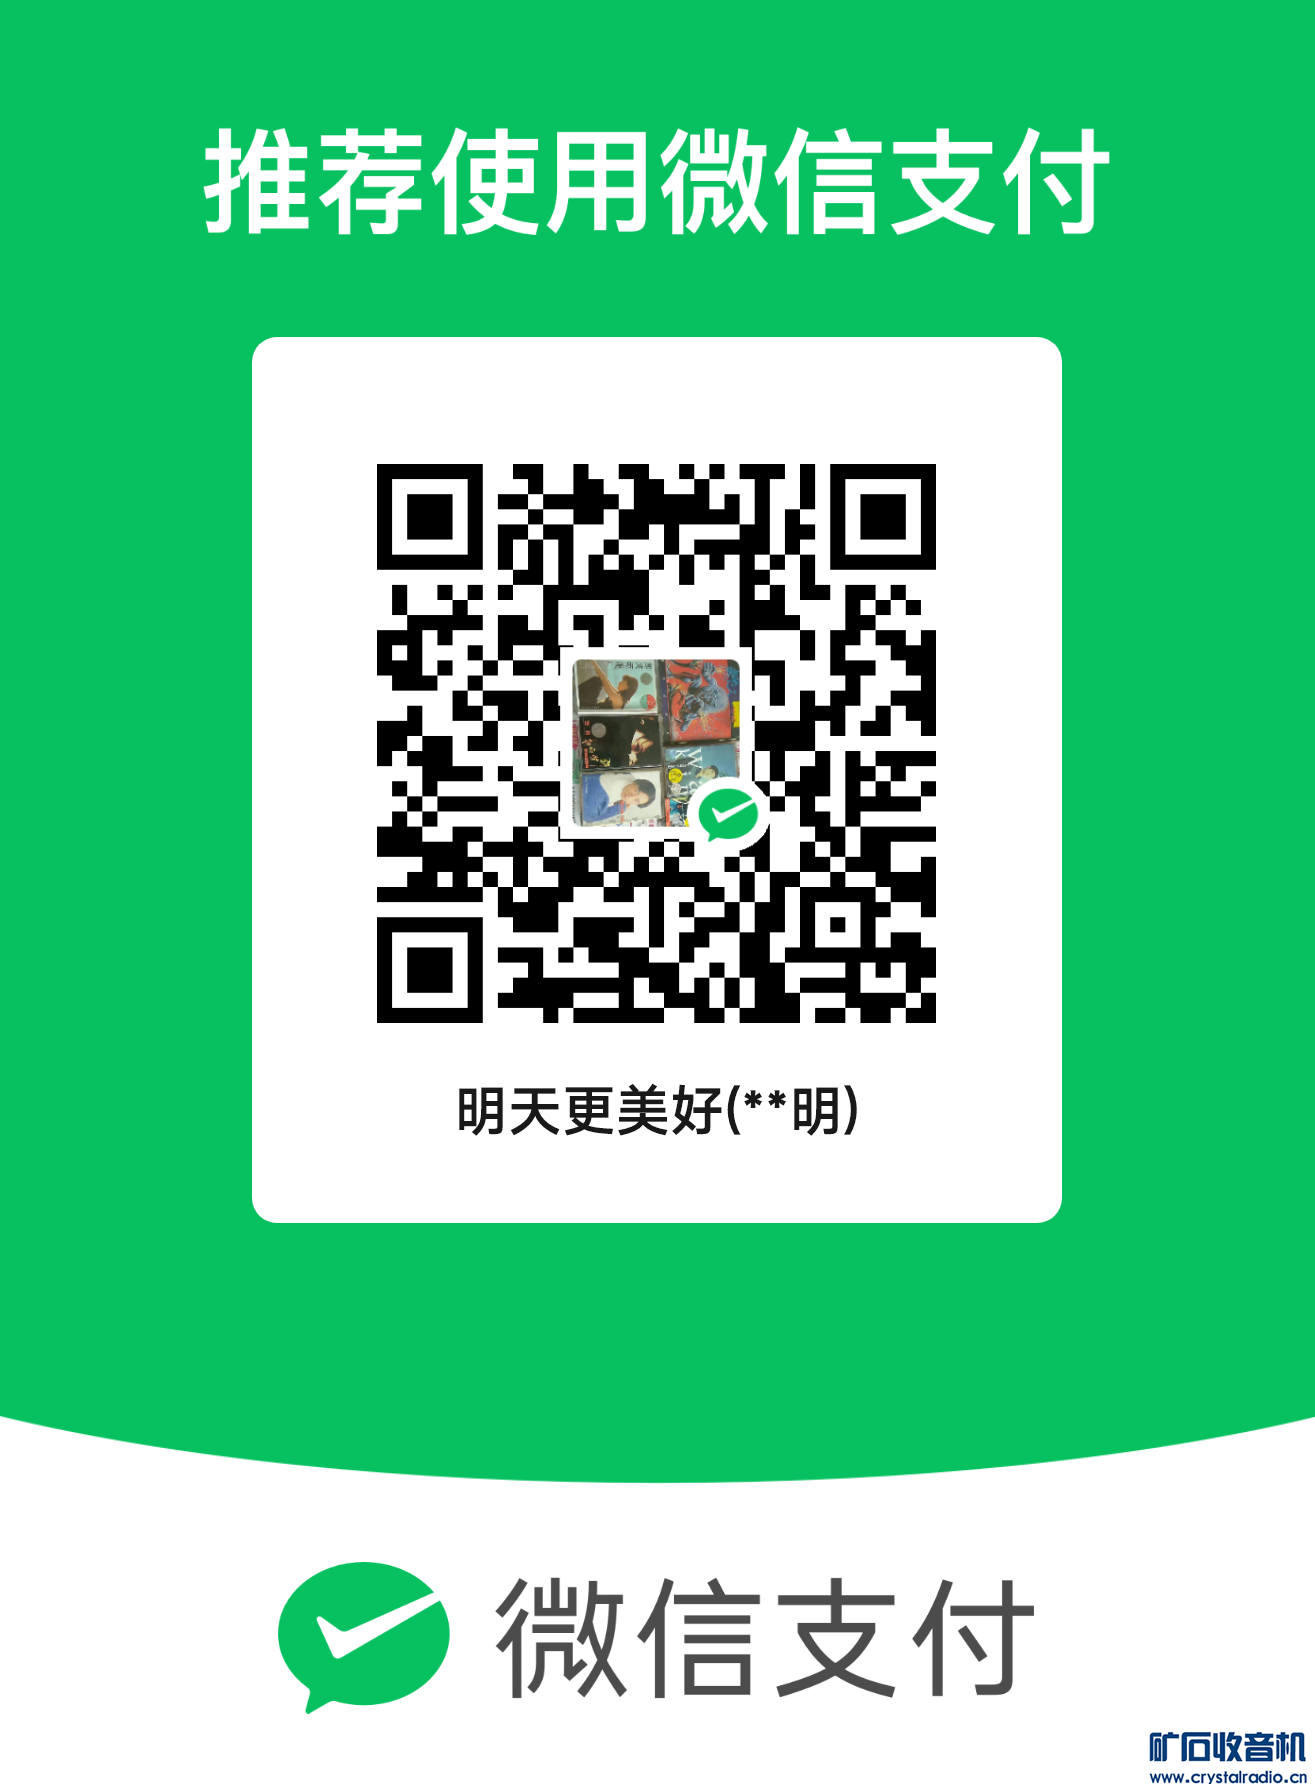 mm_facetoface_collect_qrcode_1658151253739.png